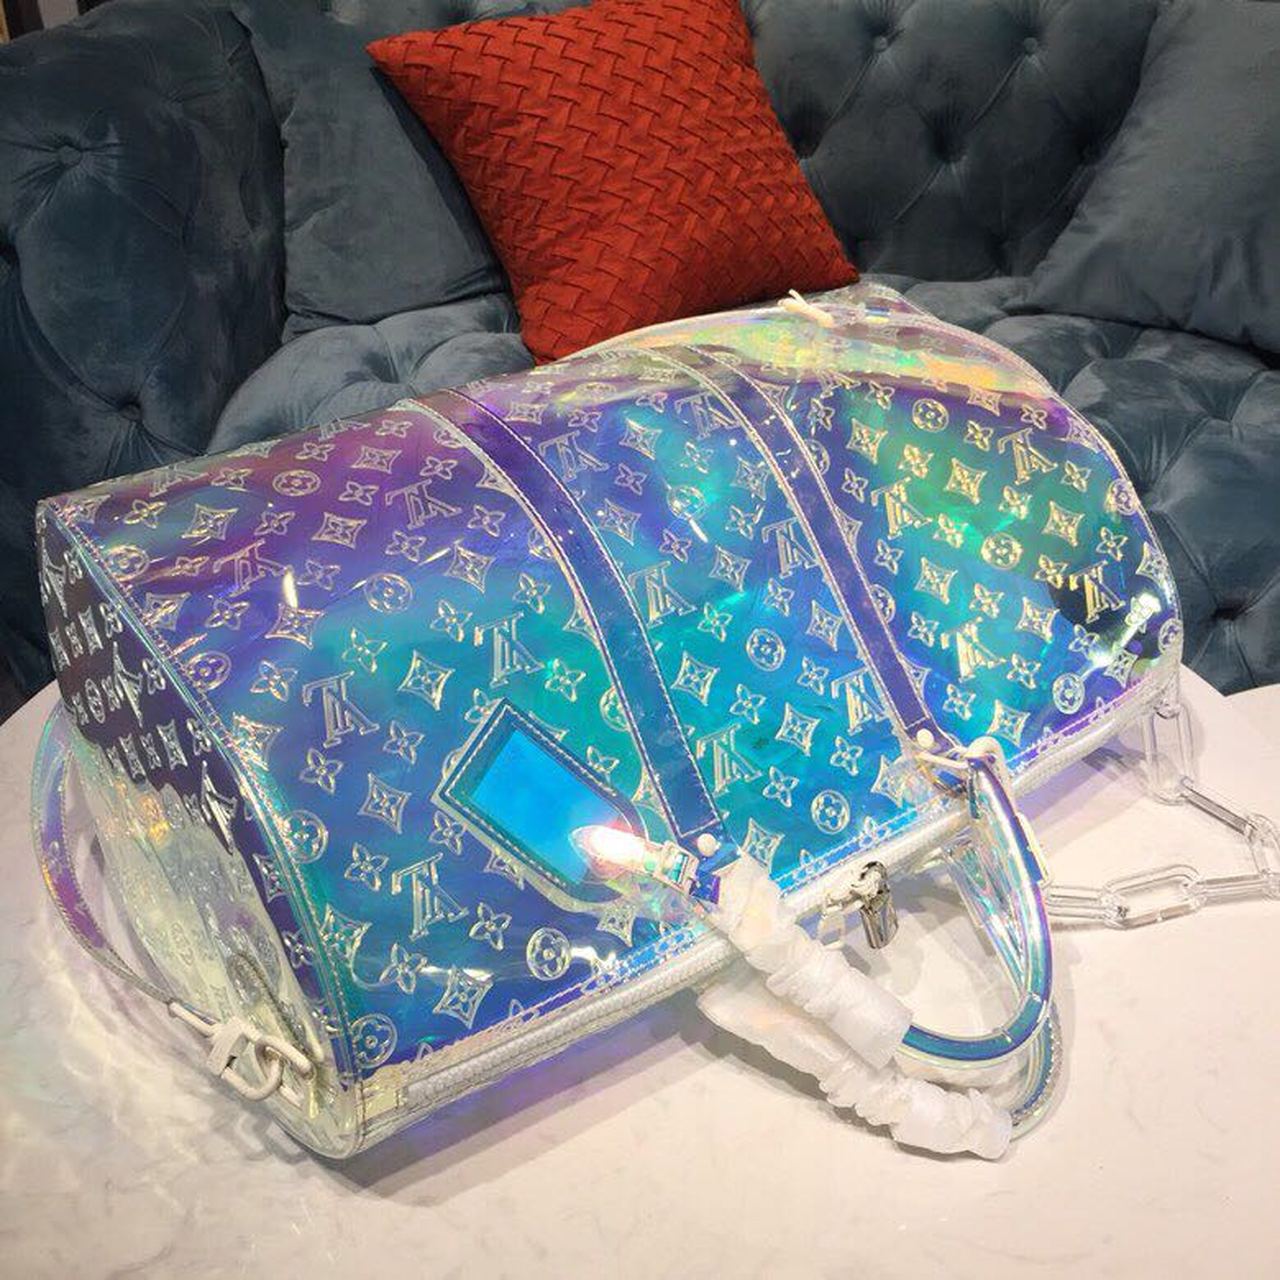 LV Keepall Bandouliere 50 Monogram PVC Iridescent Prism By Virgil Abloh For Men, Bags, Travel Bags 19.7in/50cm LV M53271